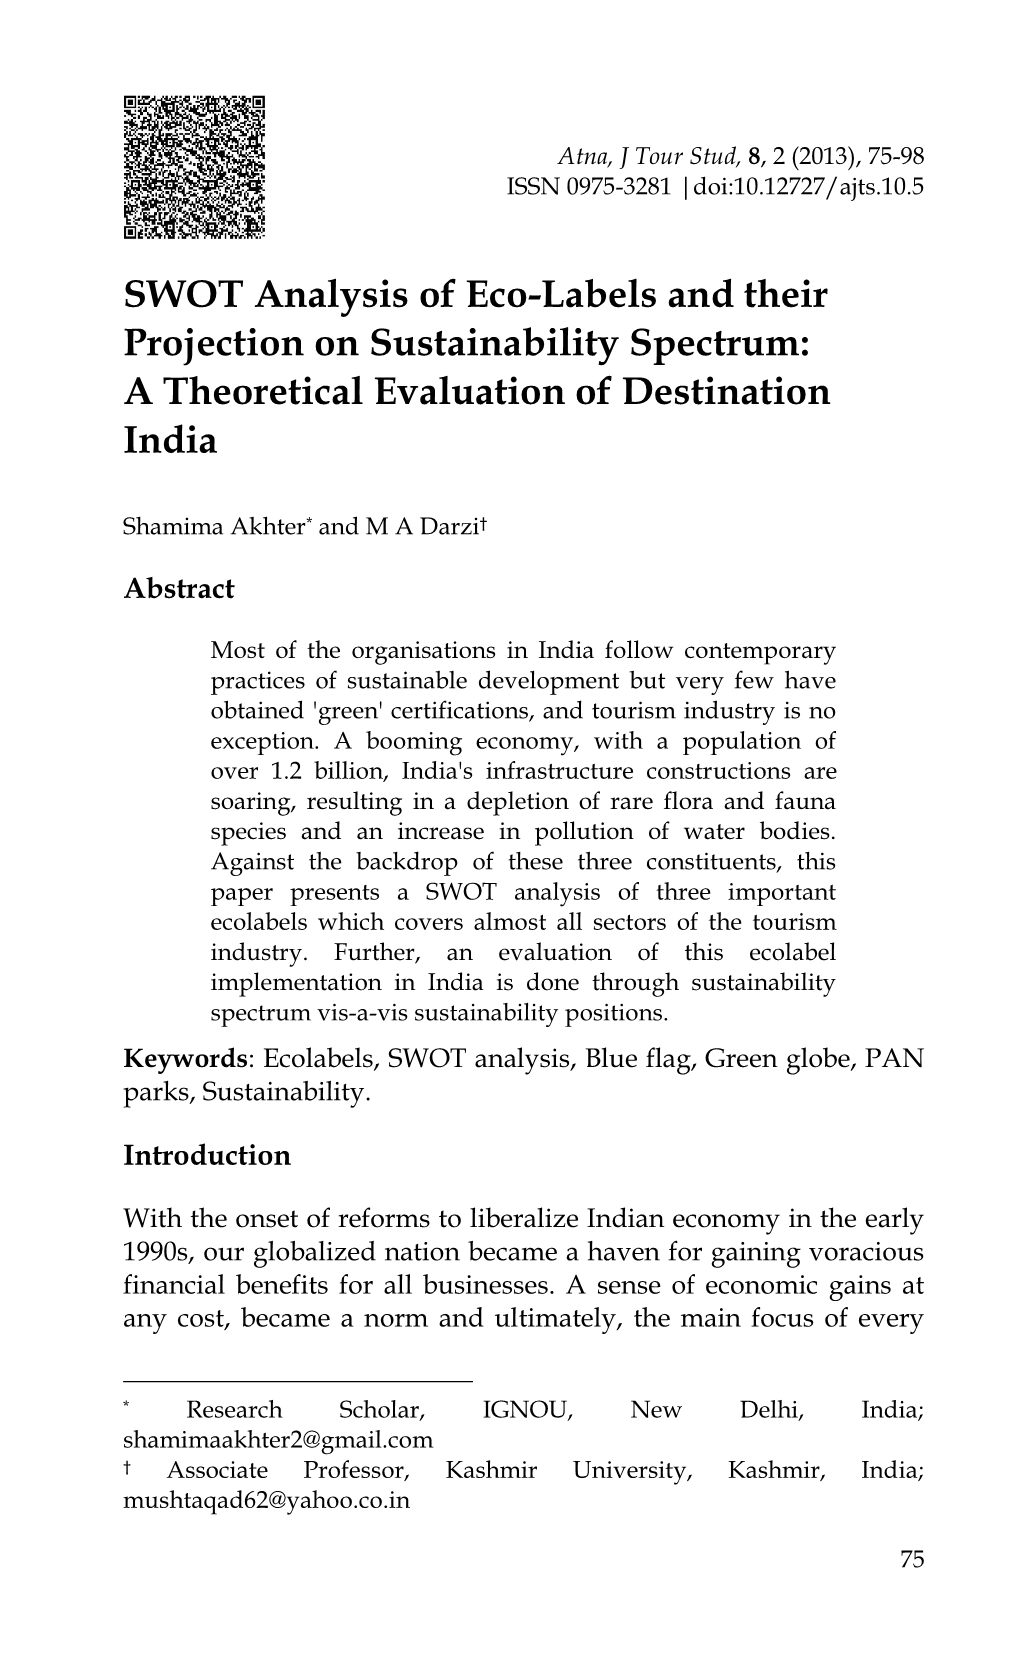 SWOT Analysis of Eco-Labels and Their Projection on Sustainability Spectrum: a Theoretical Evaluation of Destination India